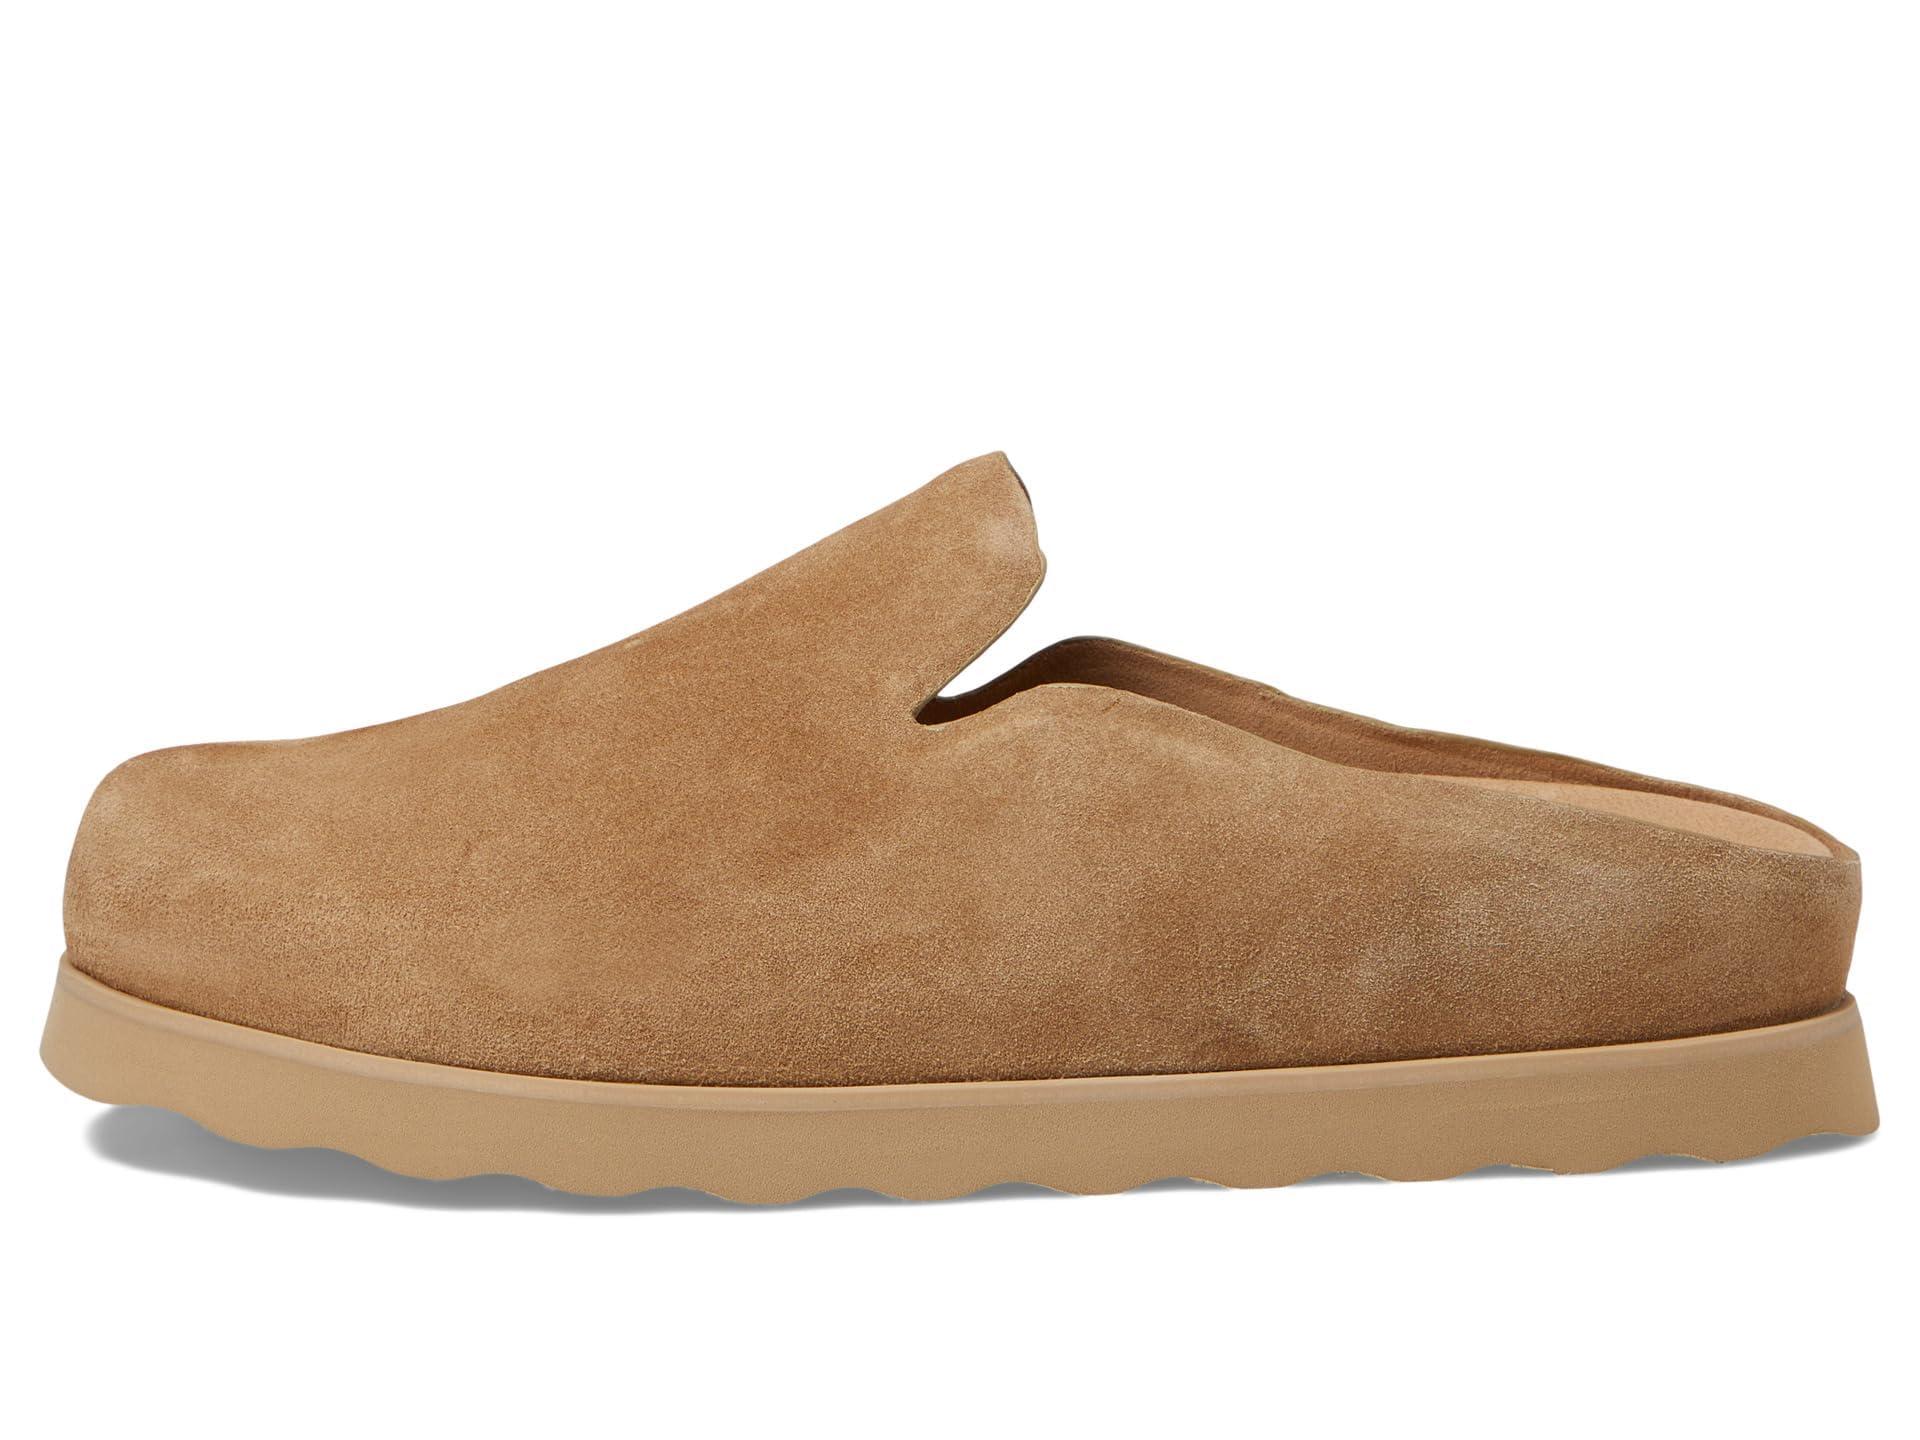 Mules Vince Camel size 39.5 EU in Suede - 31554298